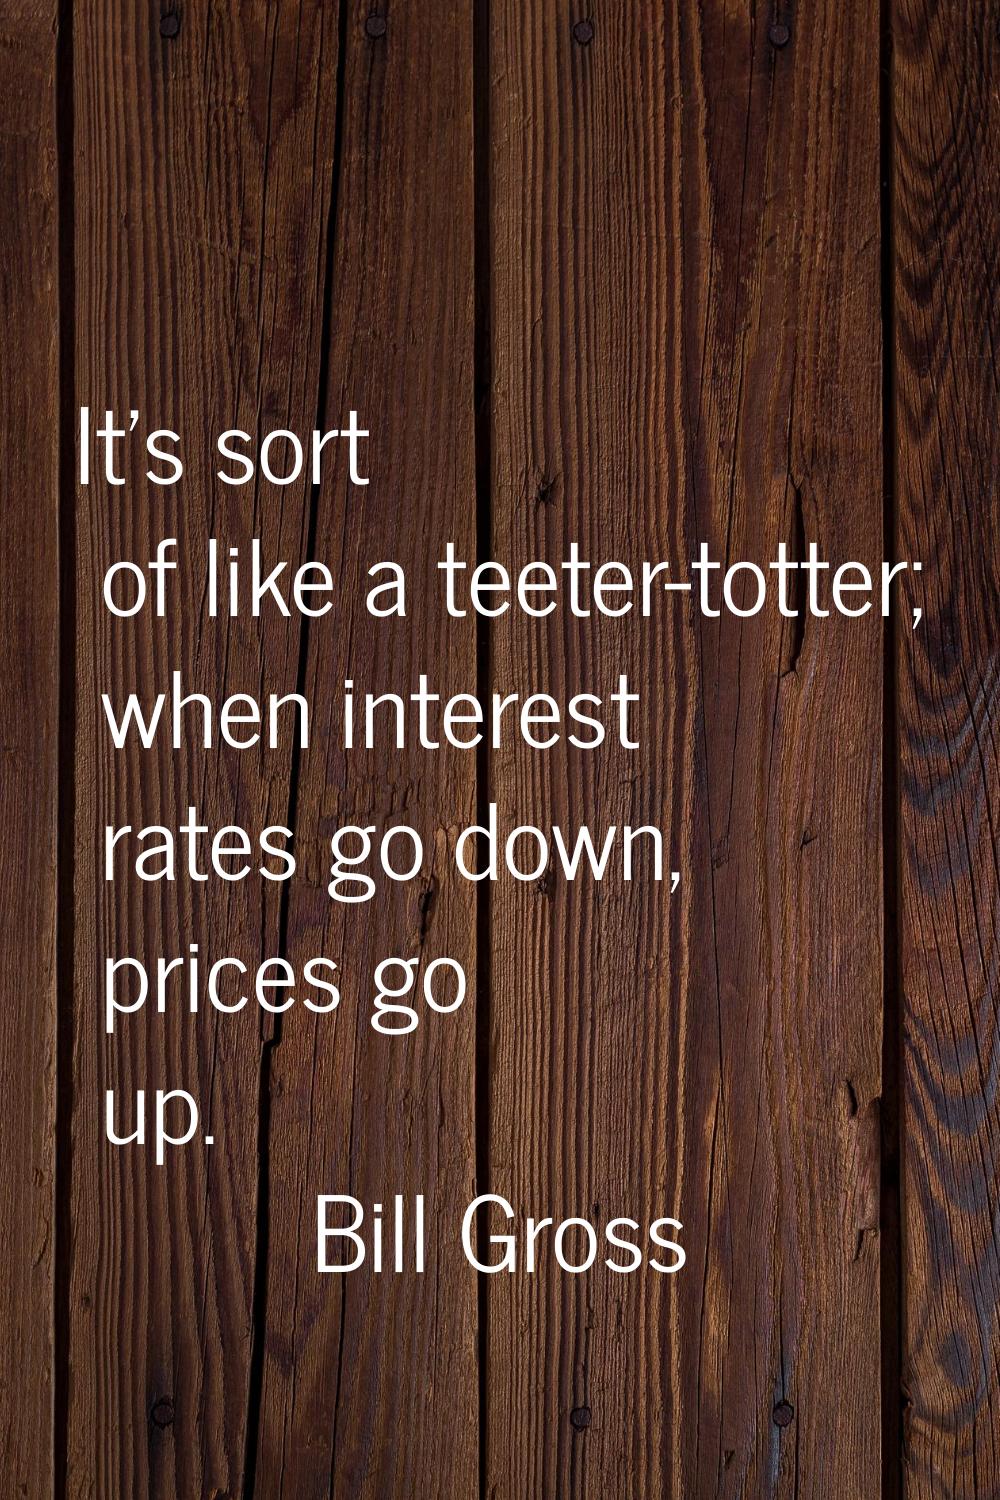 It's sort of like a teeter-totter; when interest rates go down, prices go up.